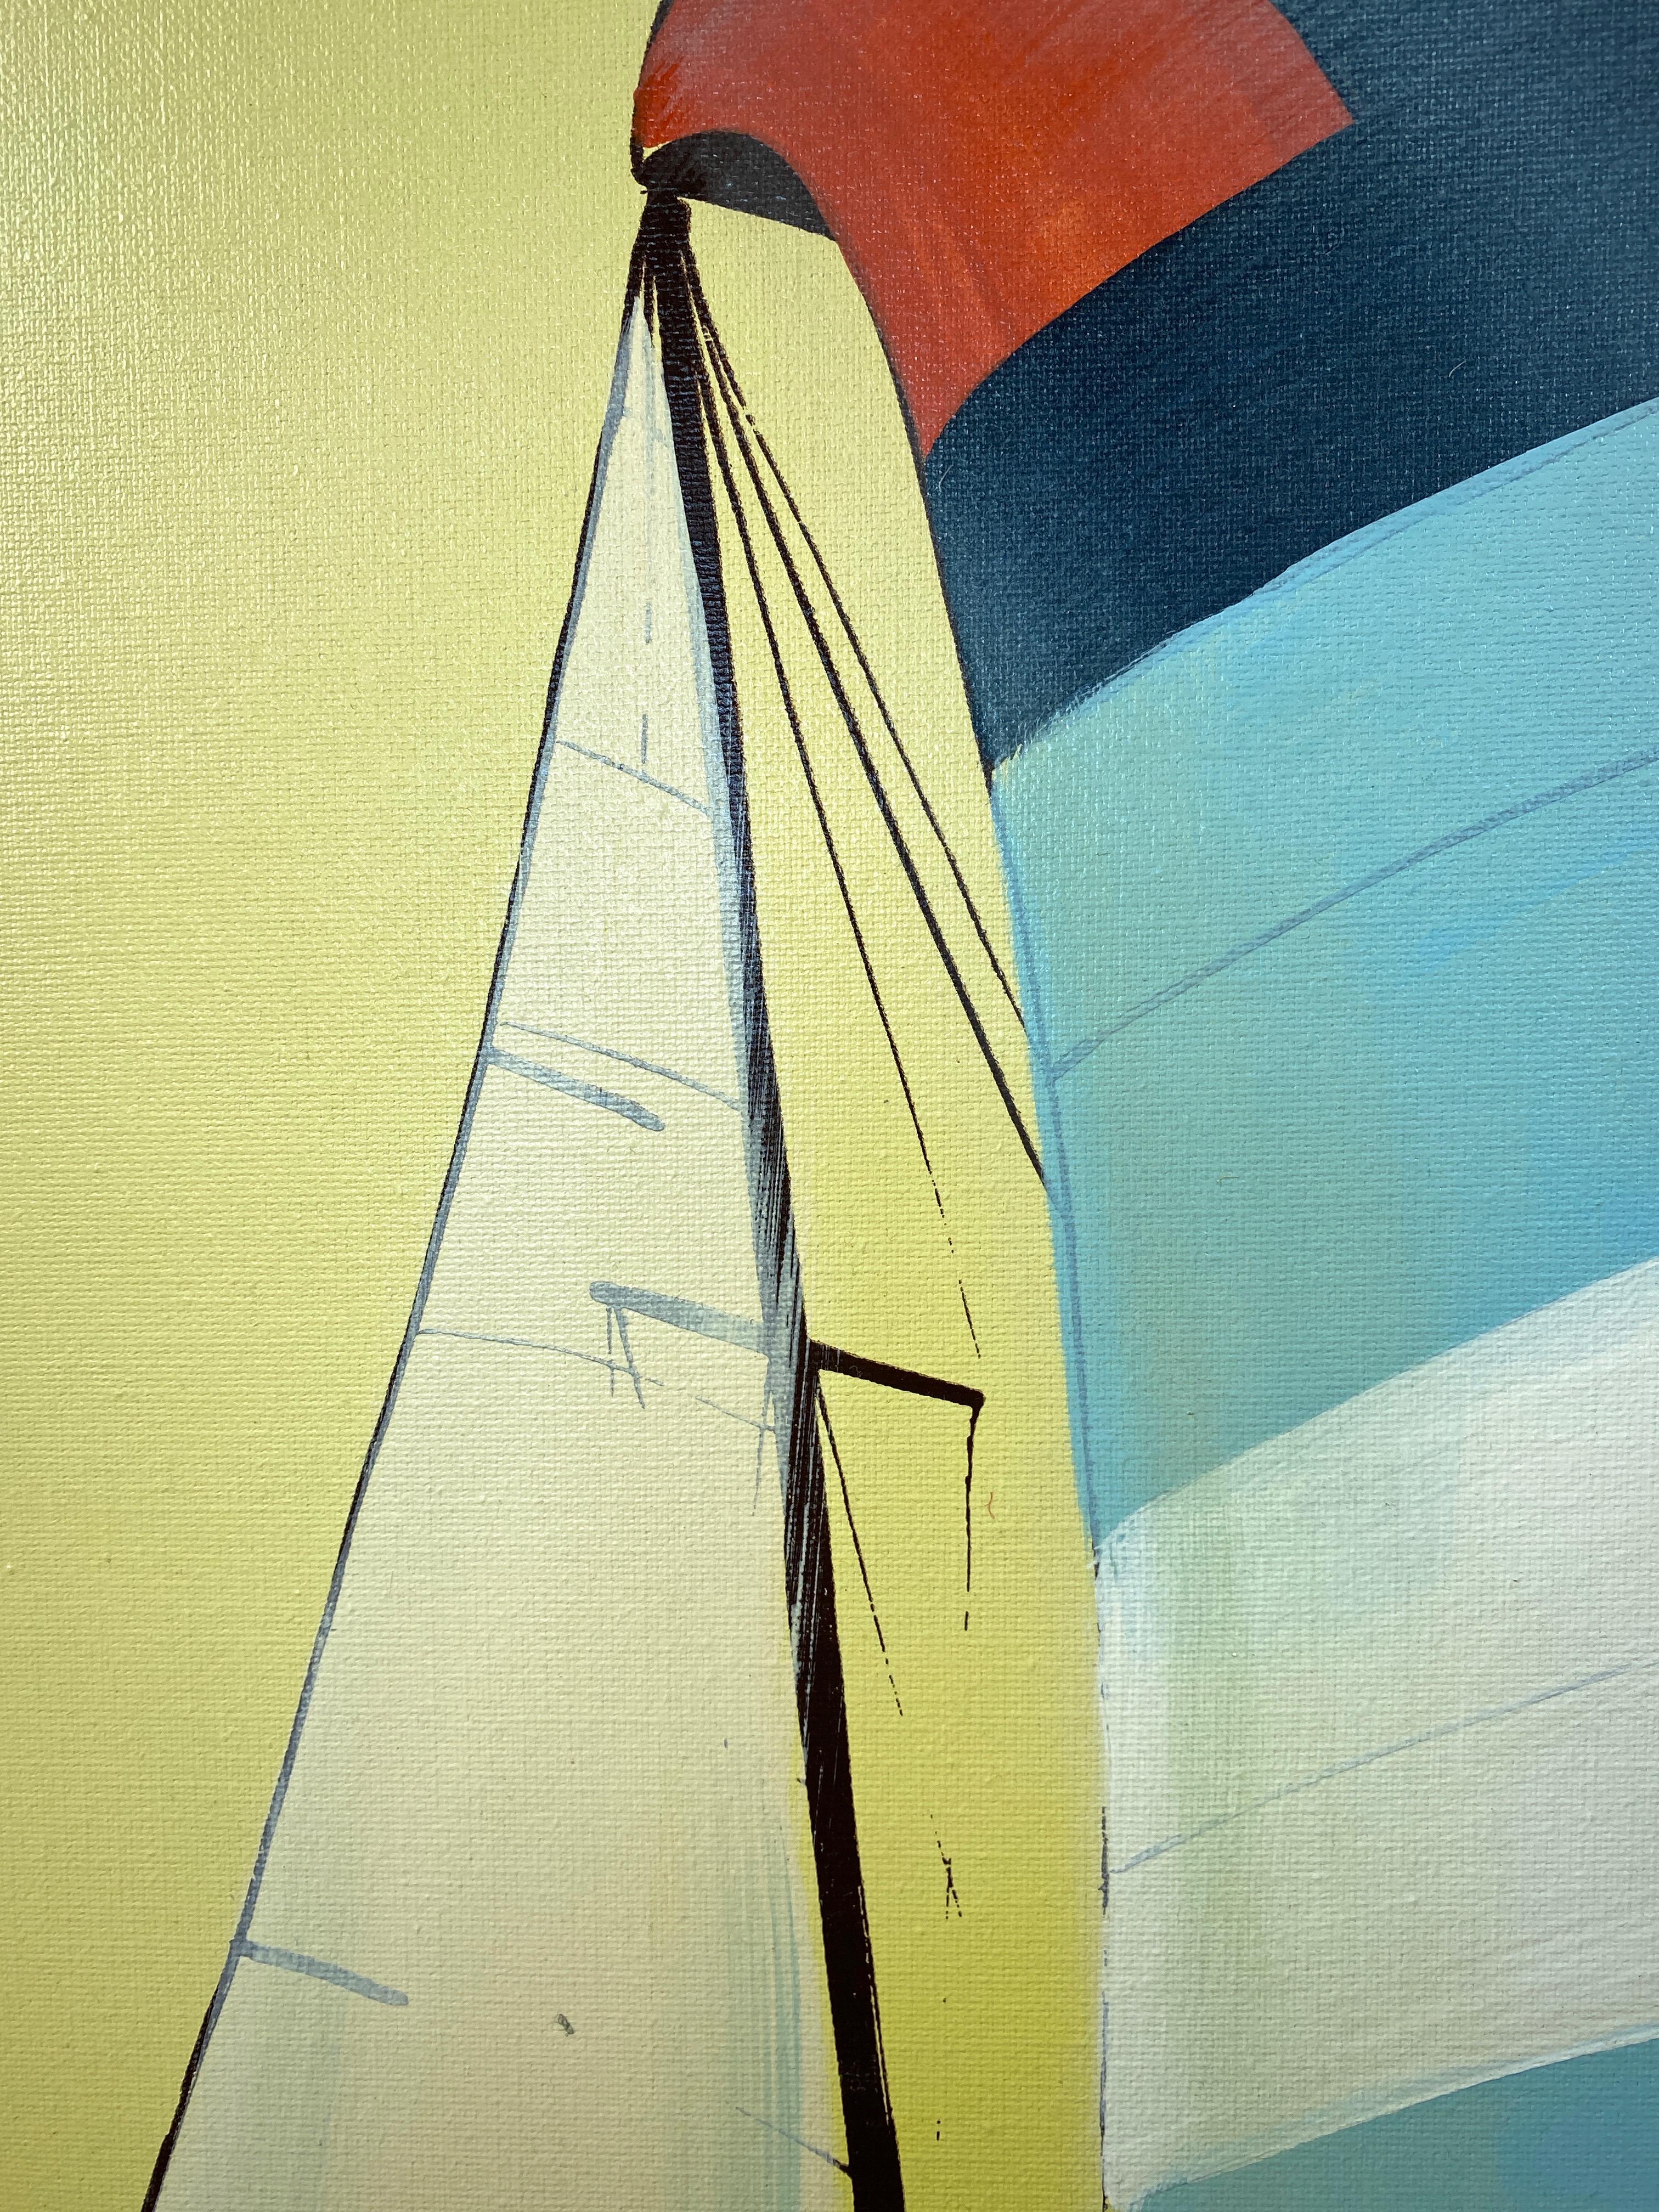 Stained Large and Dynamic Untitled Sailboat Painting, Signed 